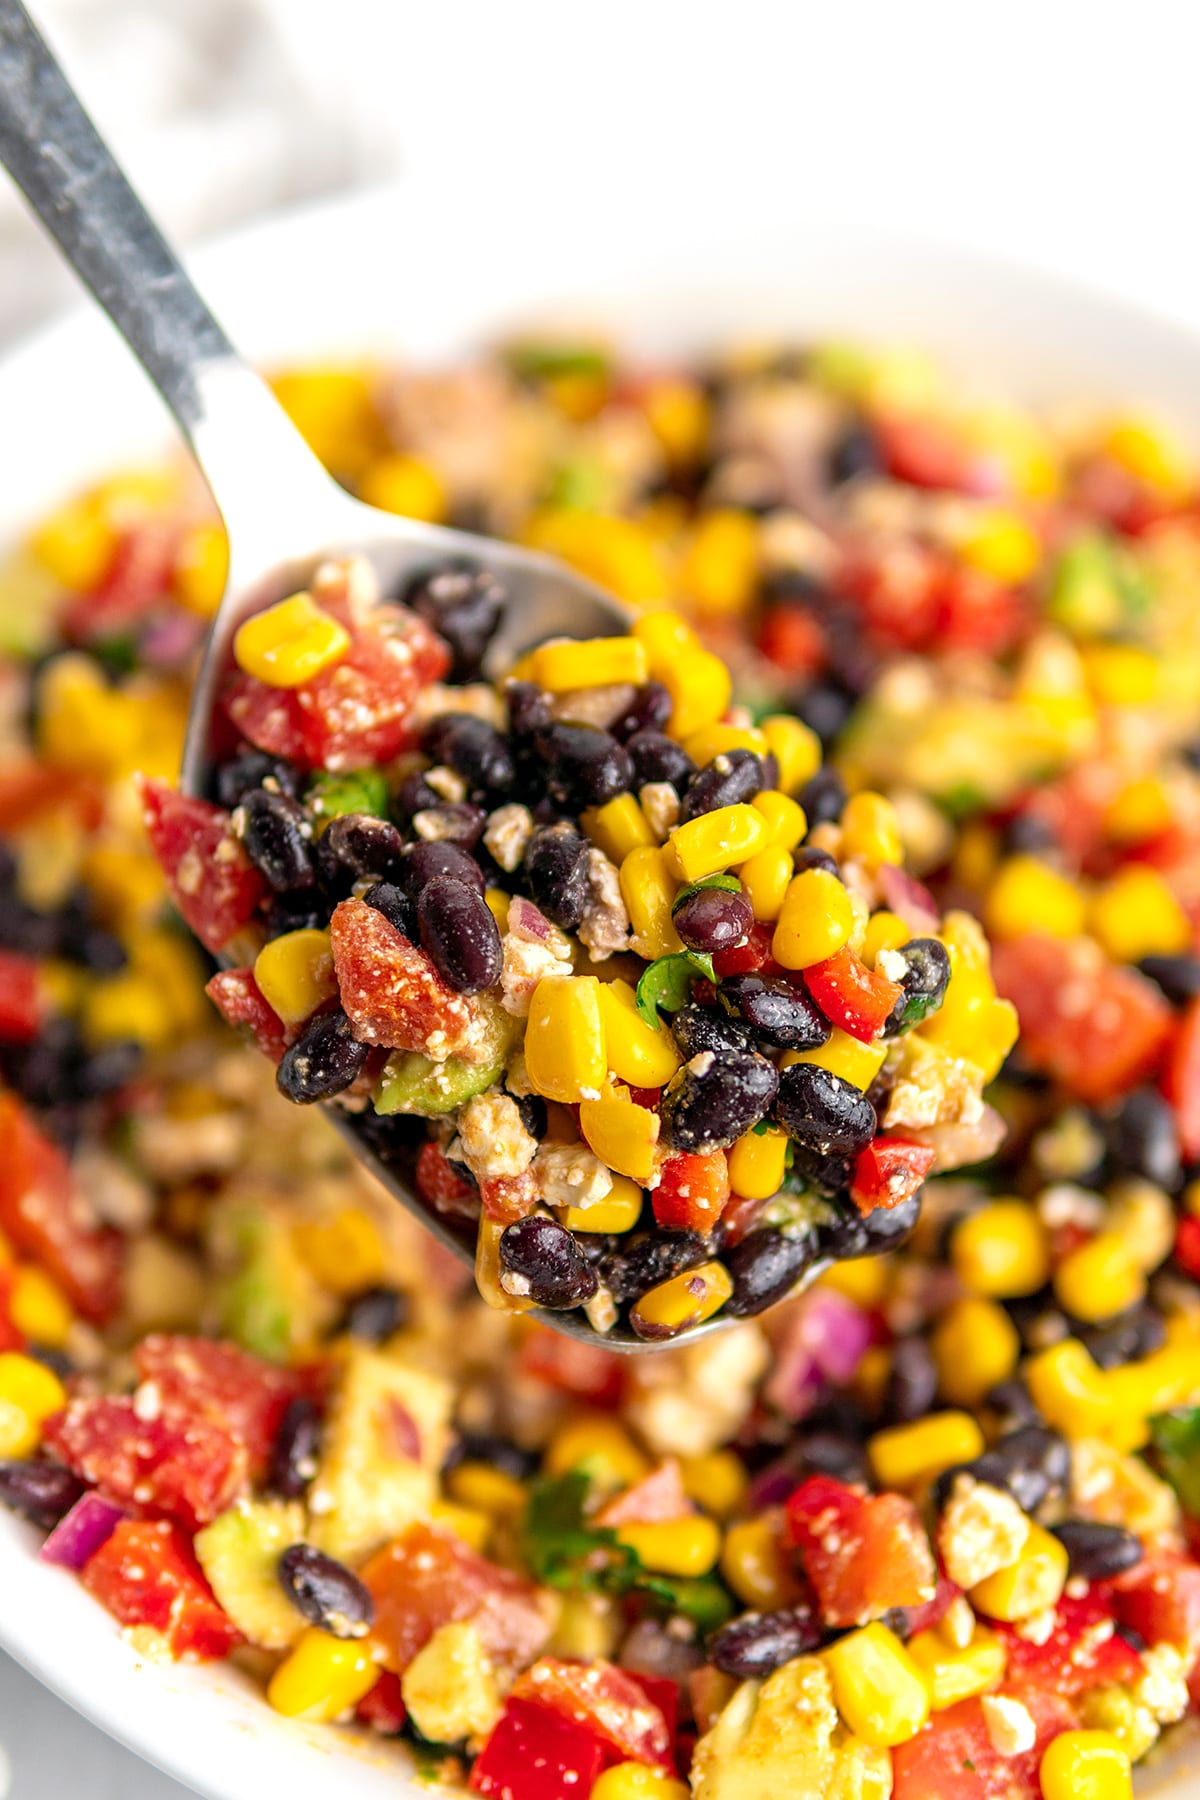 Mexican Salad With Black Beans, Corn & Avocado